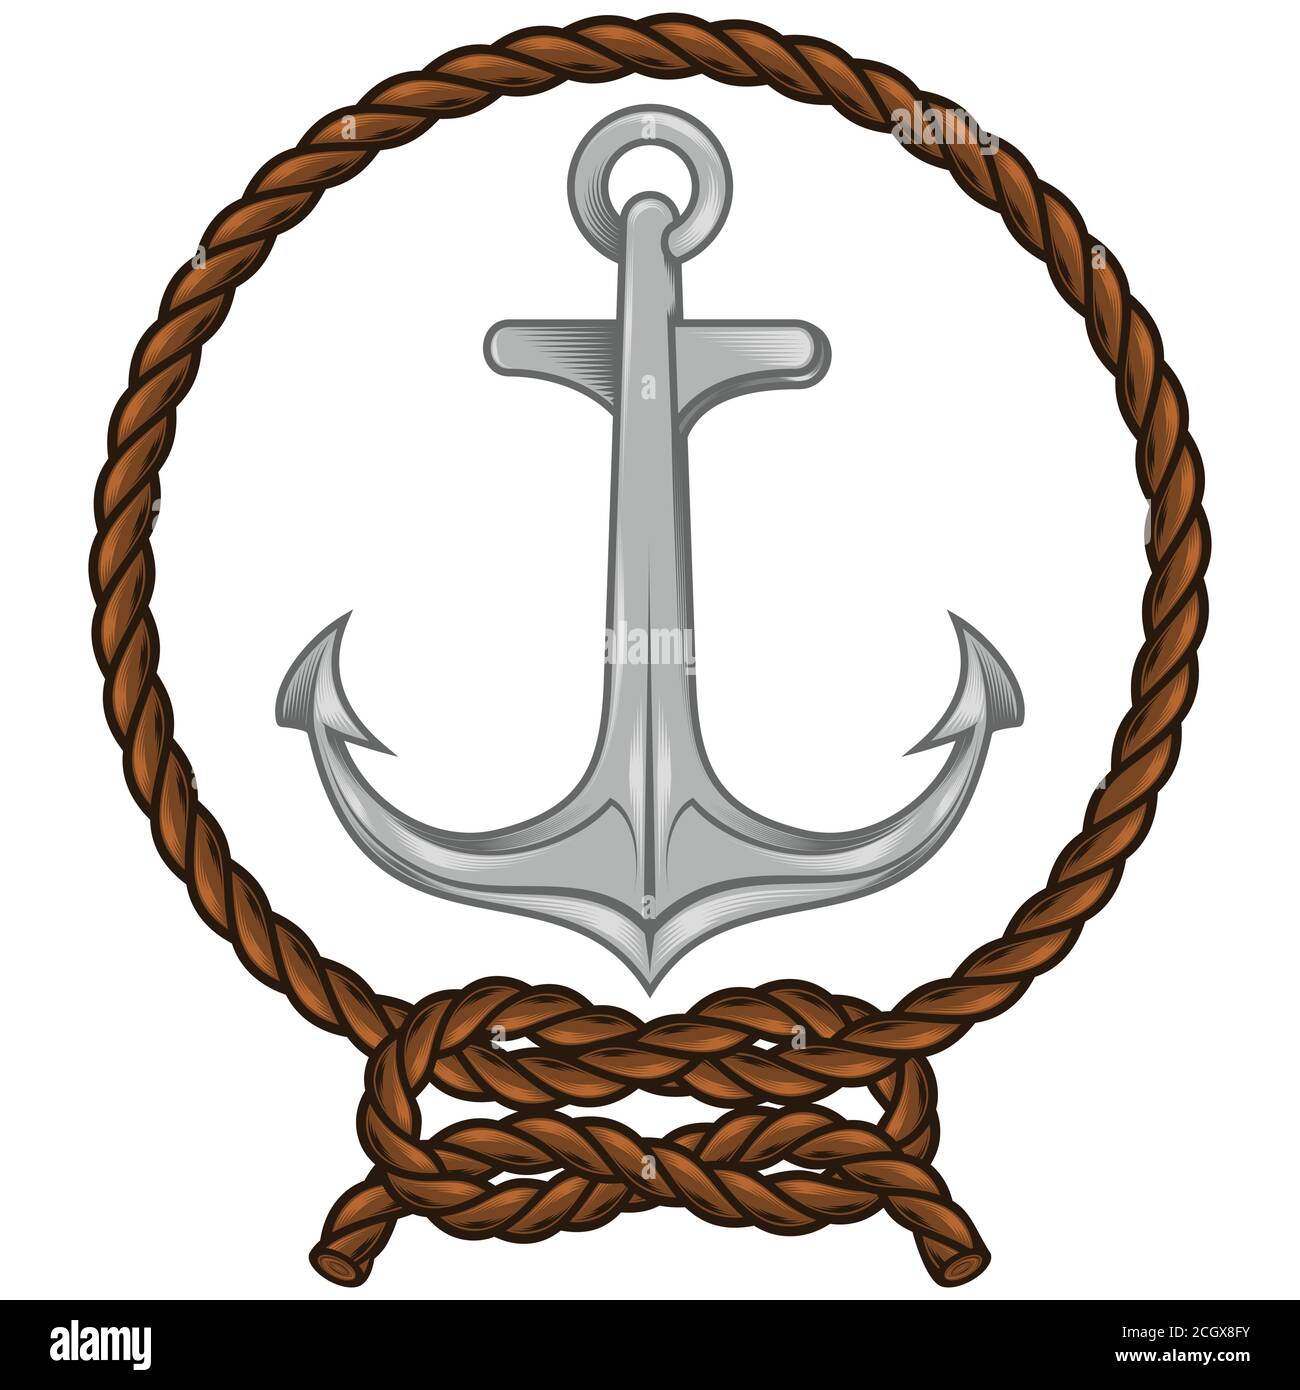 Vector illustration of anchor surrounded by intertwined rope, shadow white background Stock Vector